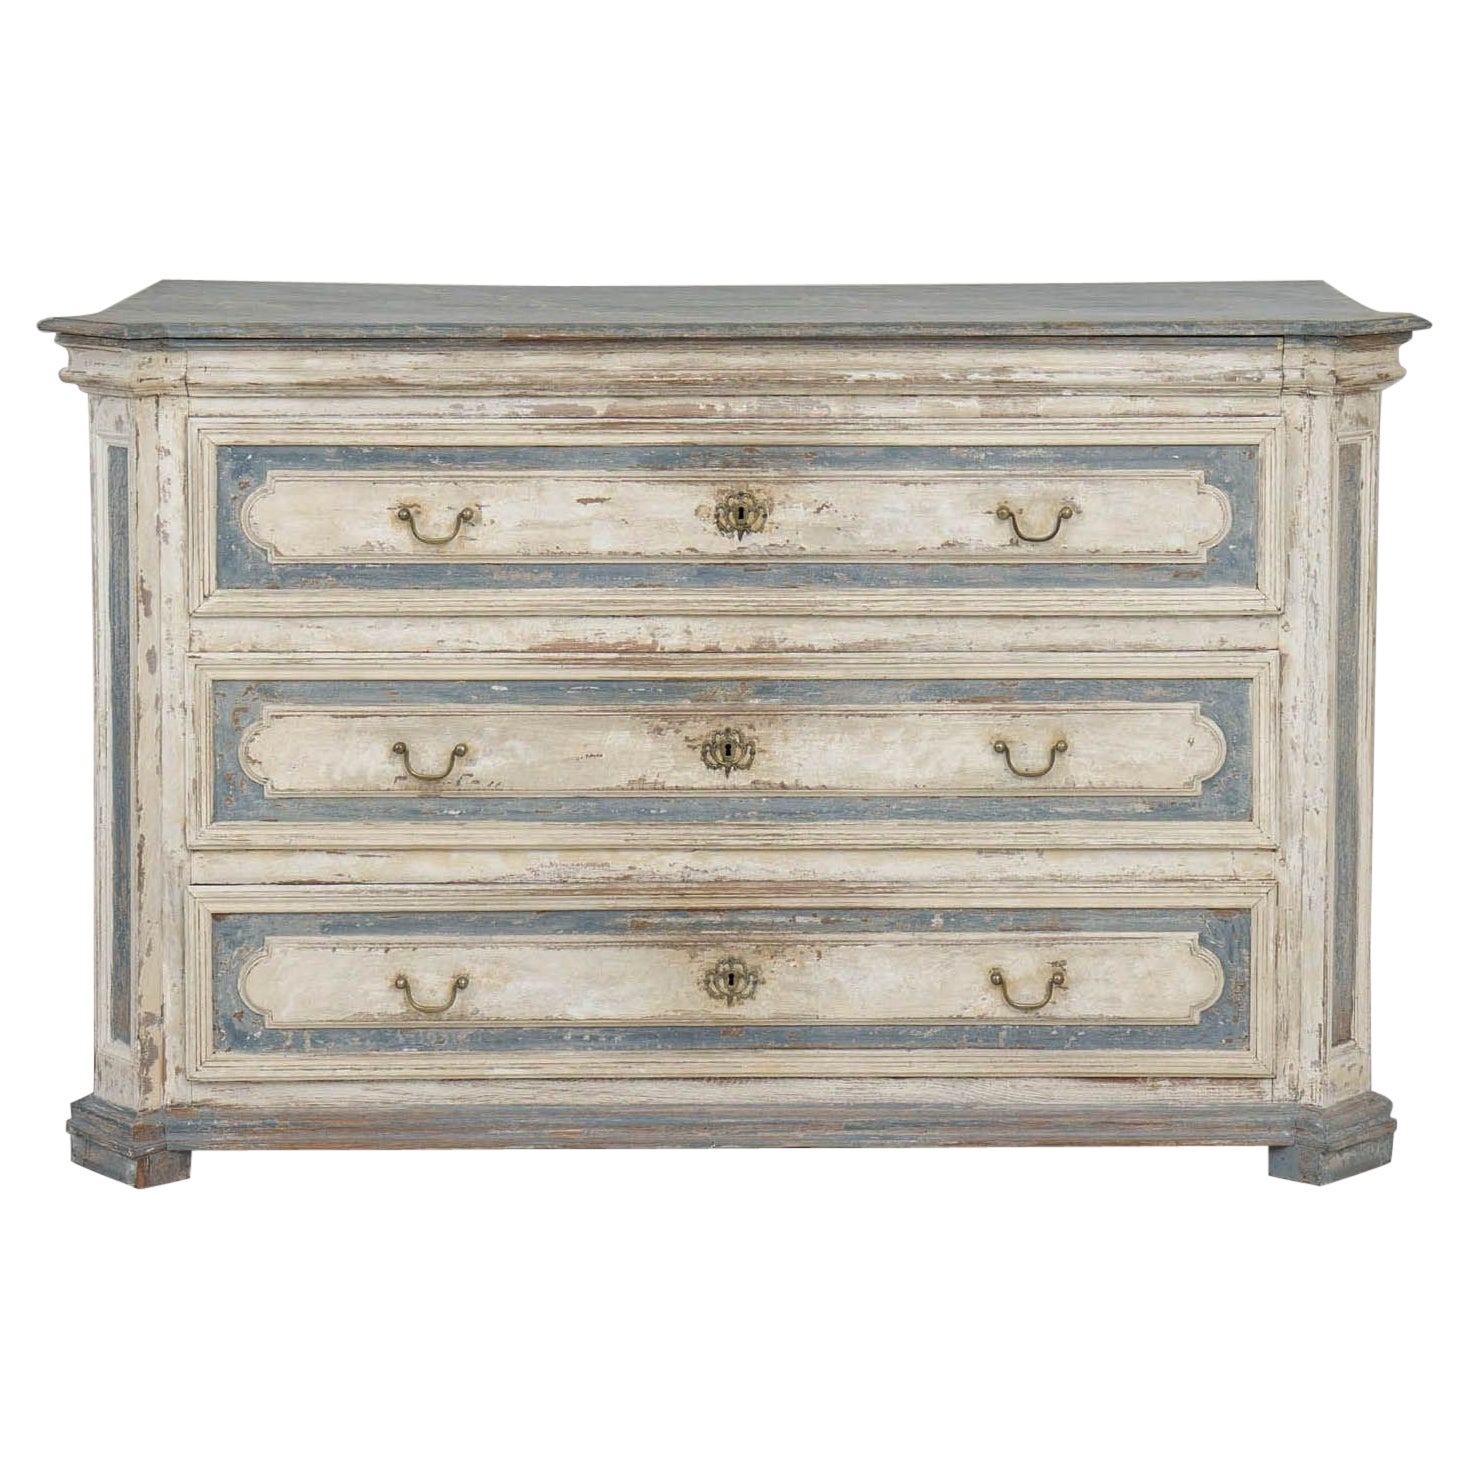 18th c. French Large Painted Commode with Hand-Painted Marbleized Top